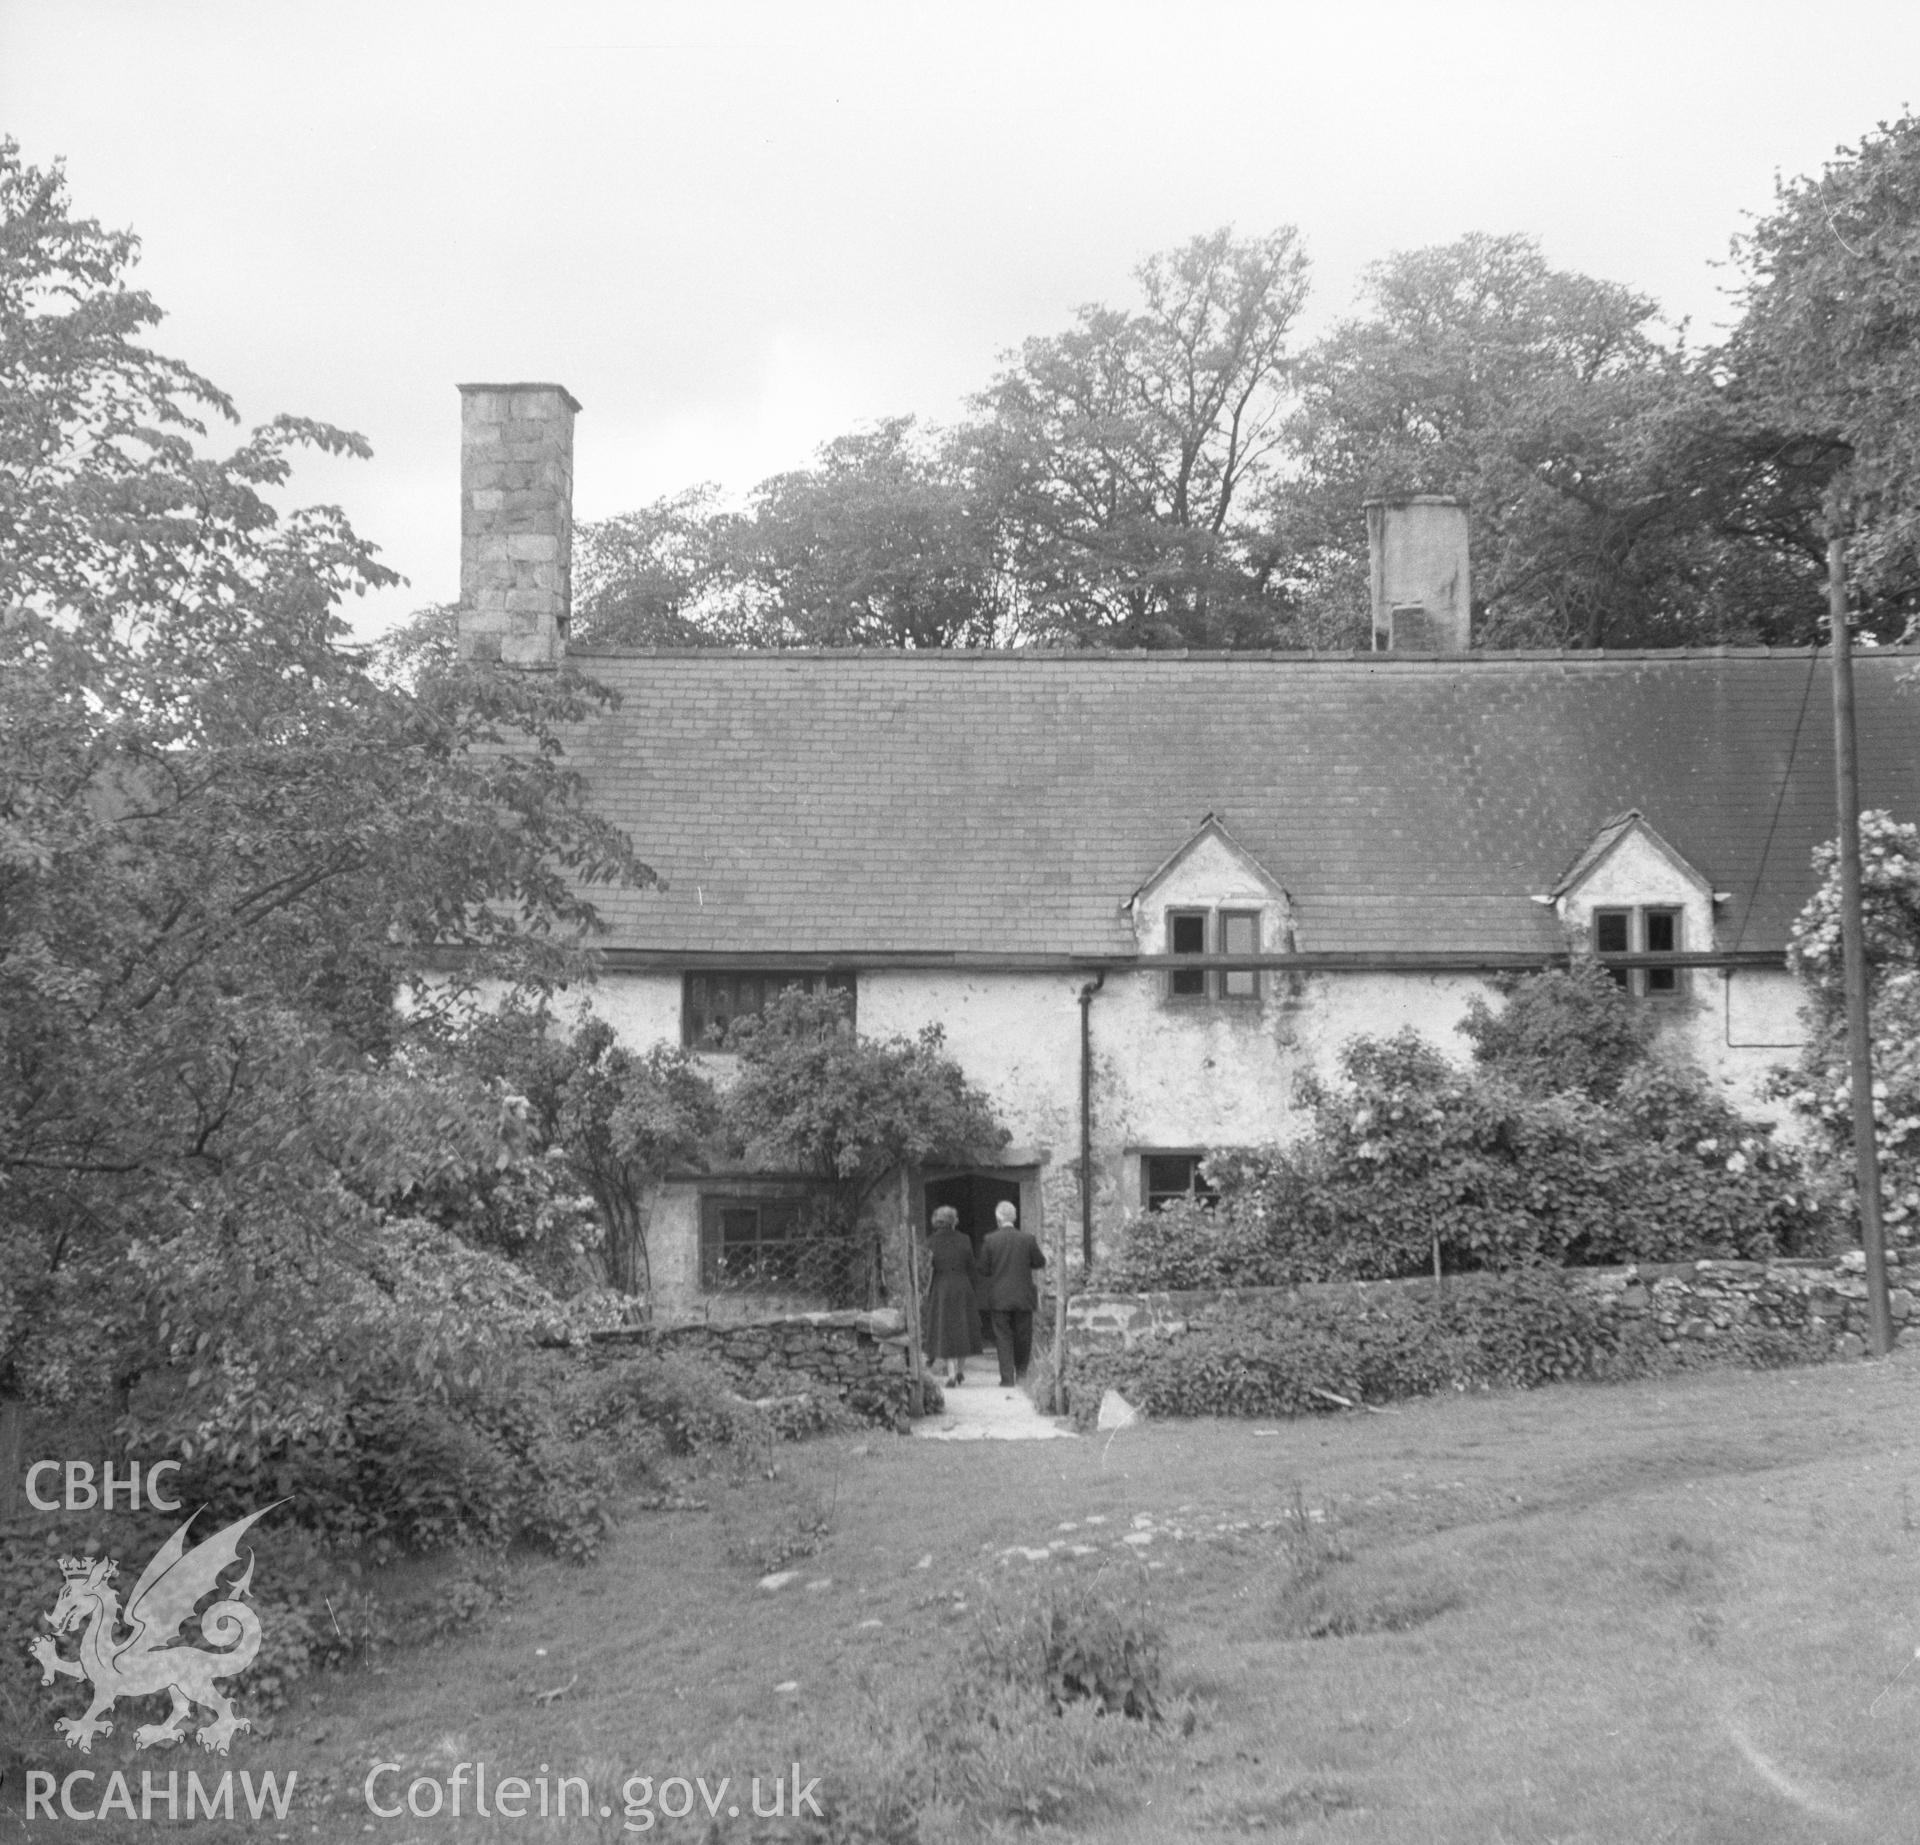 Black and white nitrate negative showing exterior view, with two figures, of Brithdir Mawr, Flintshire.